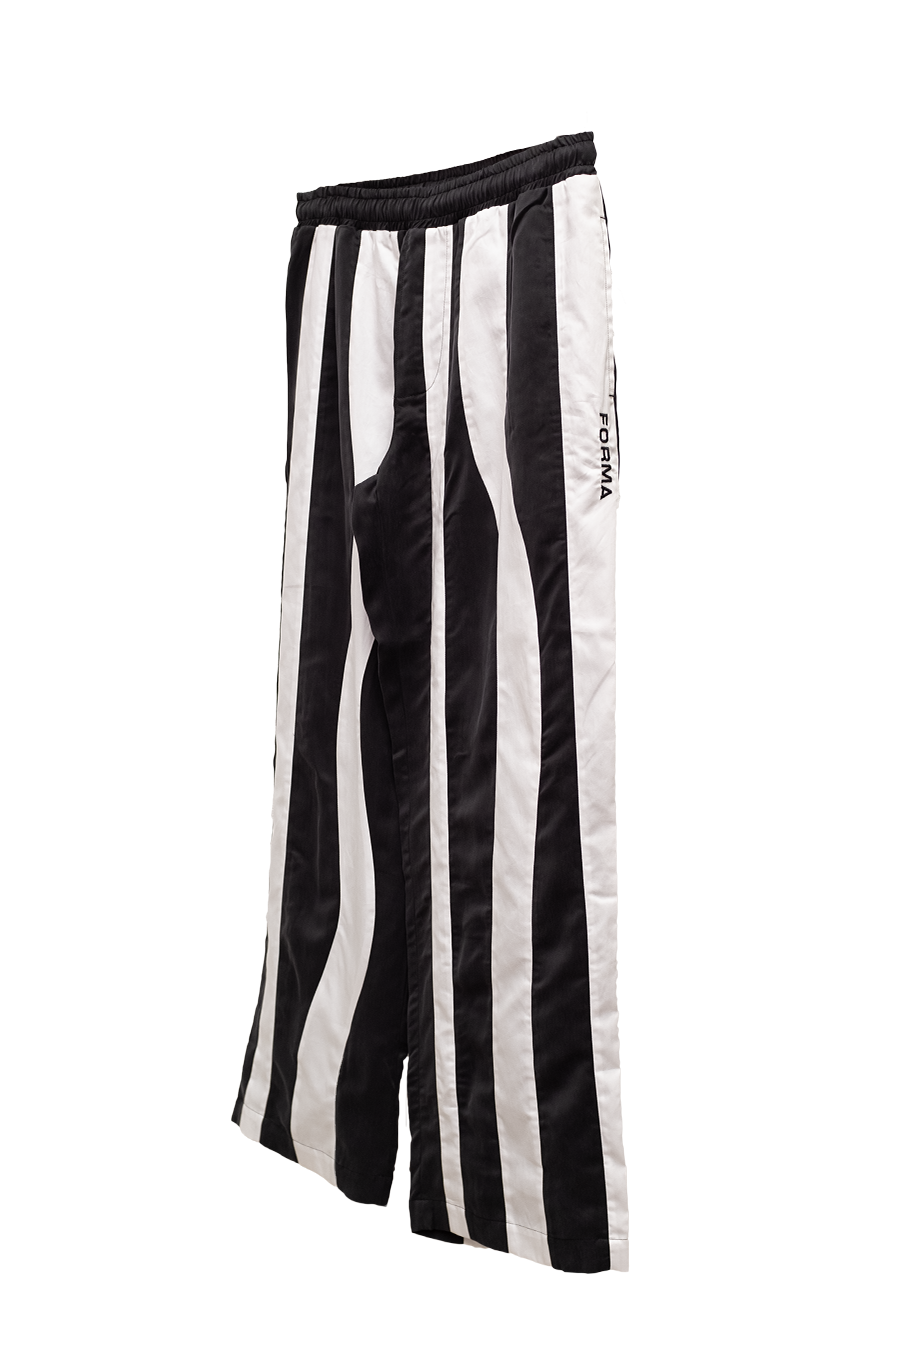 WHITE STRIPES CUPRO RELAX PANT